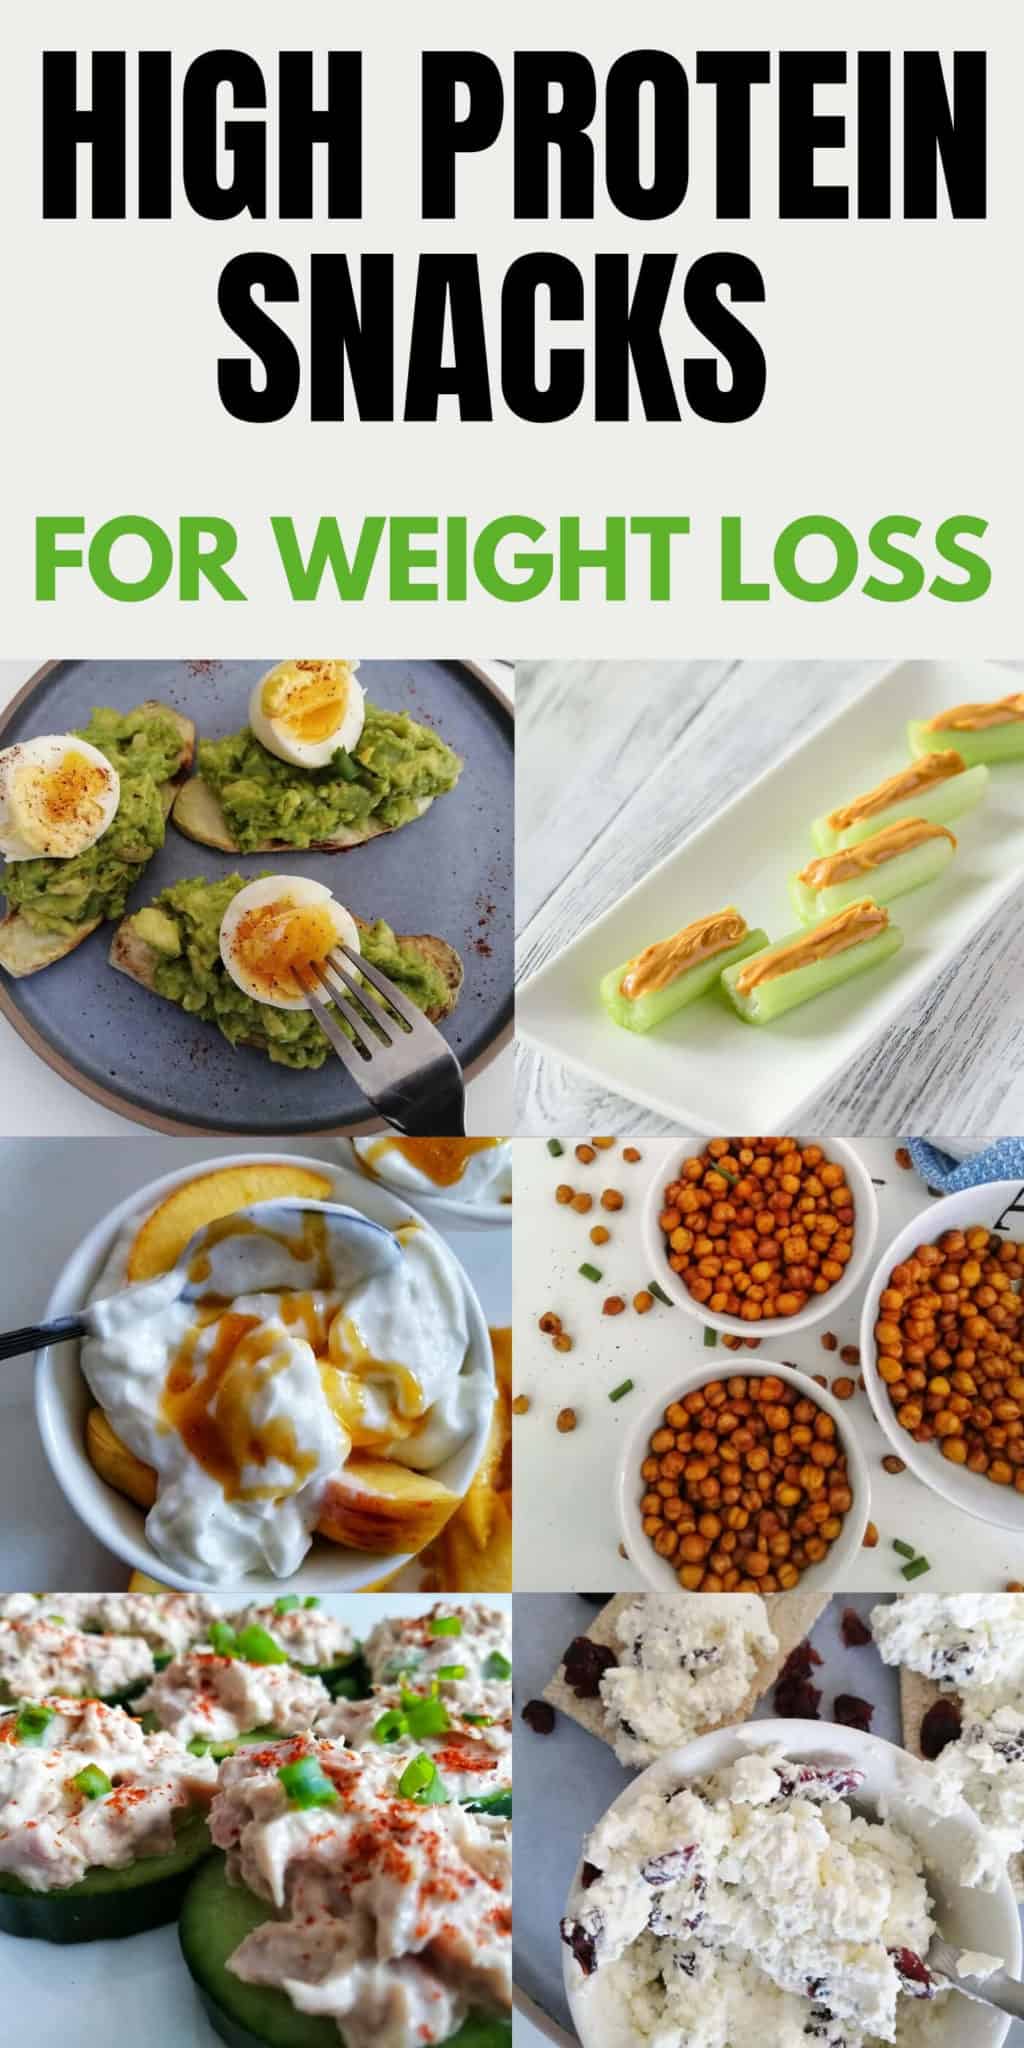 12 insanely delicious high protein snacks for weight loss